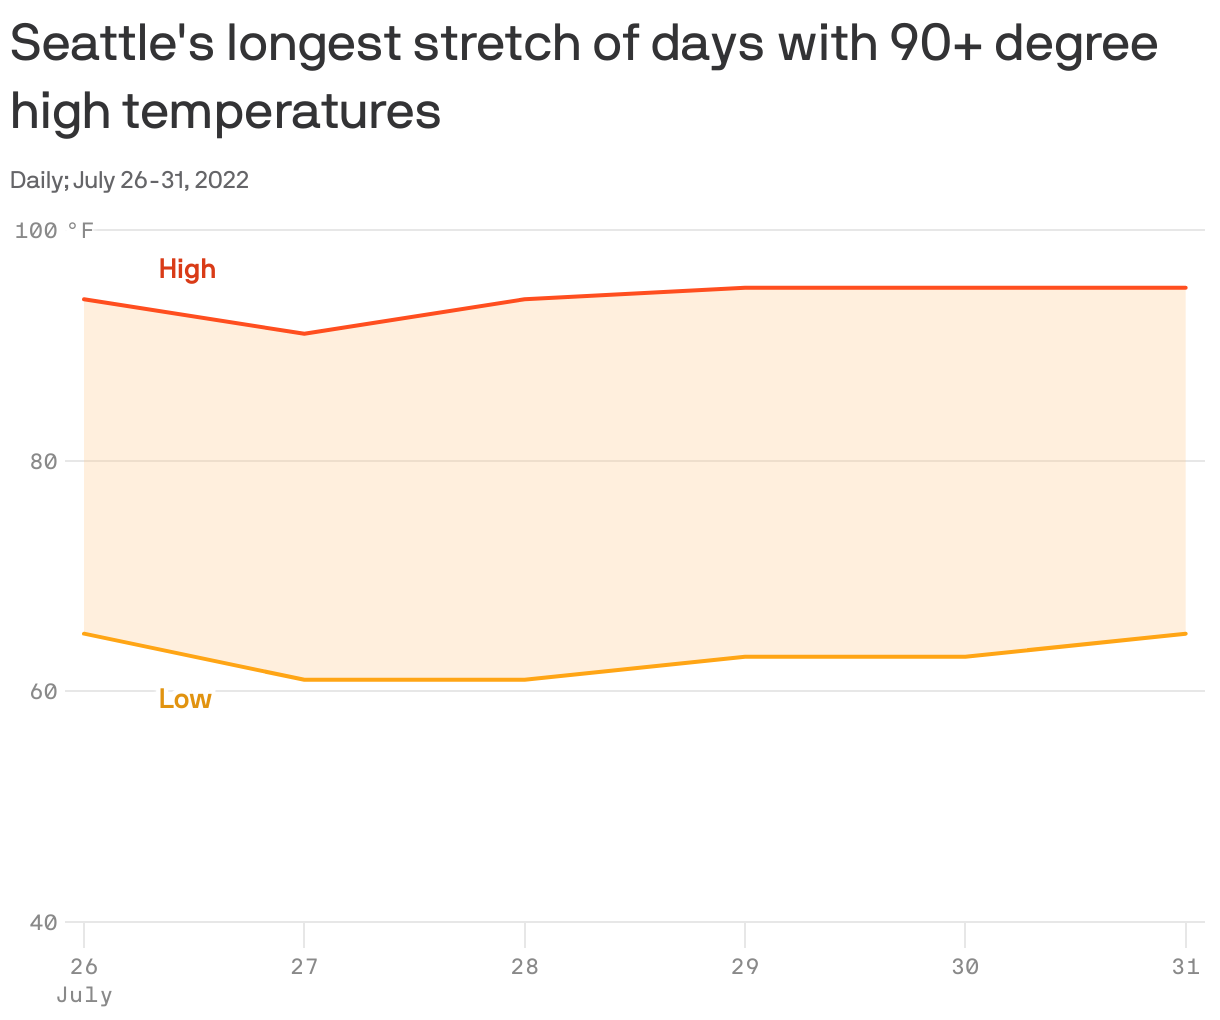 Seattle's longest stretch of days with 90+ degree high temperatures